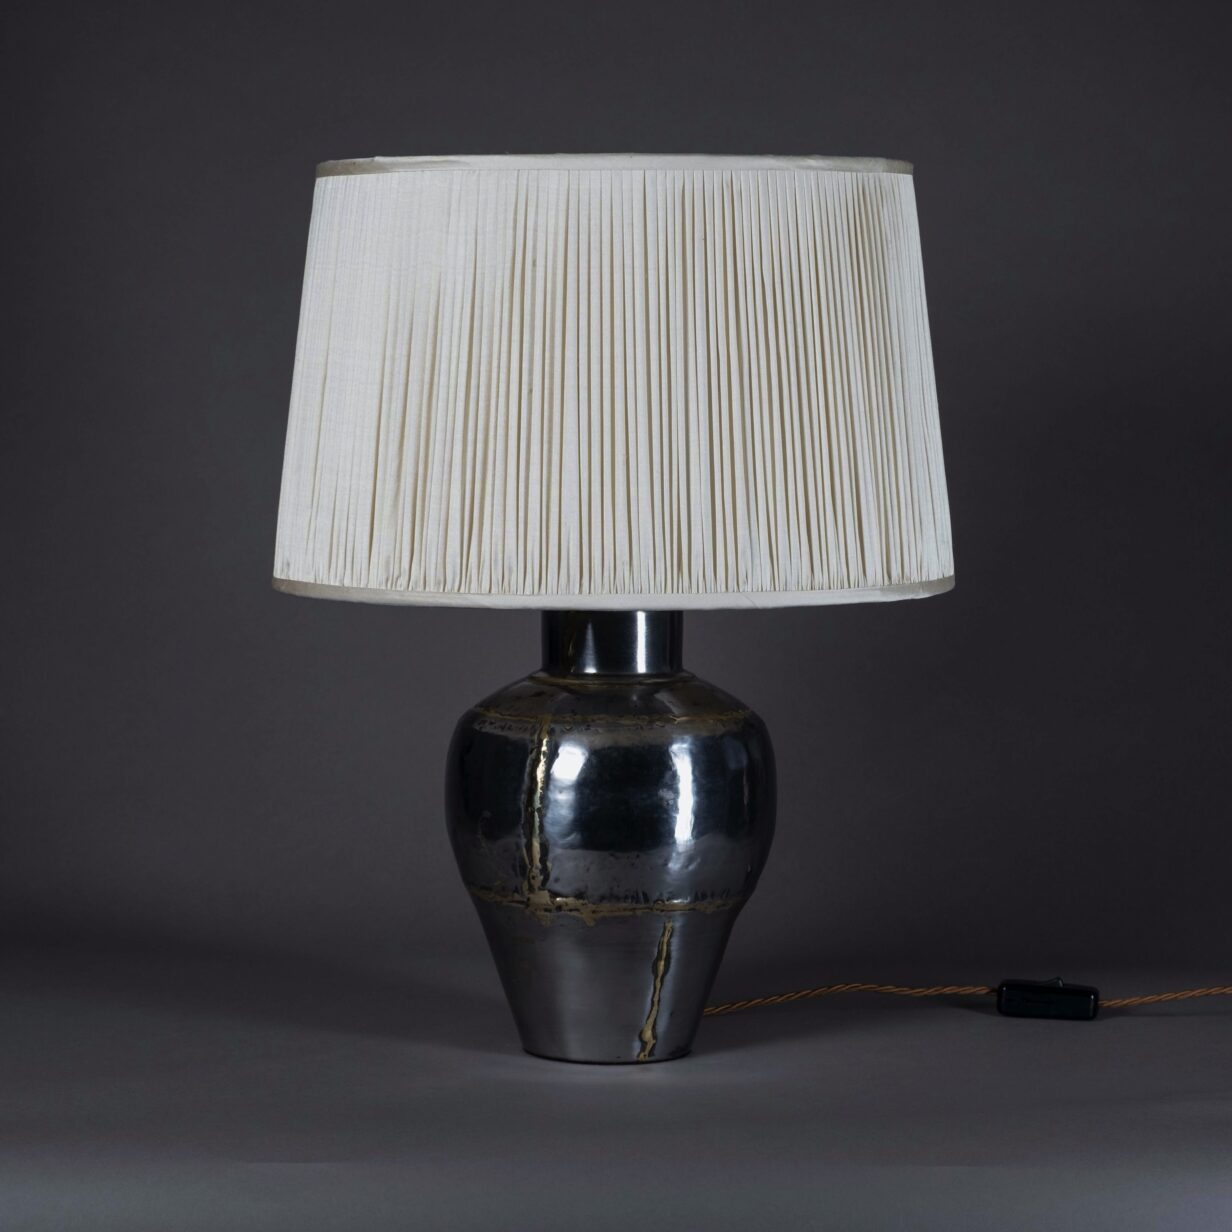 20th century polished steel & brass seamed vase lamp